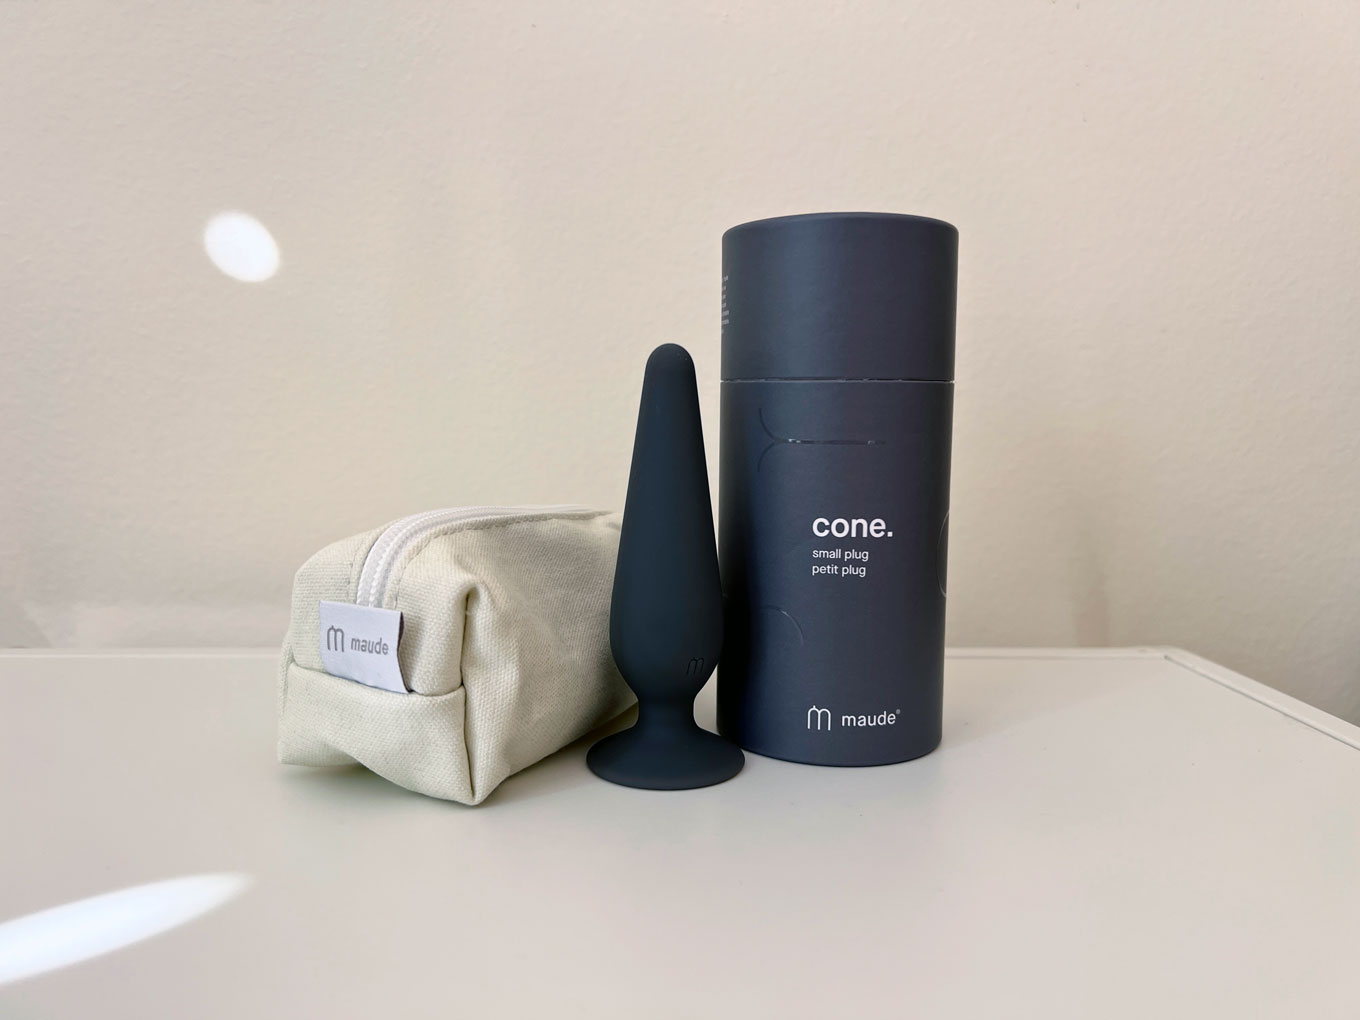 Maude's Cone sits next to its packaging and carrying case